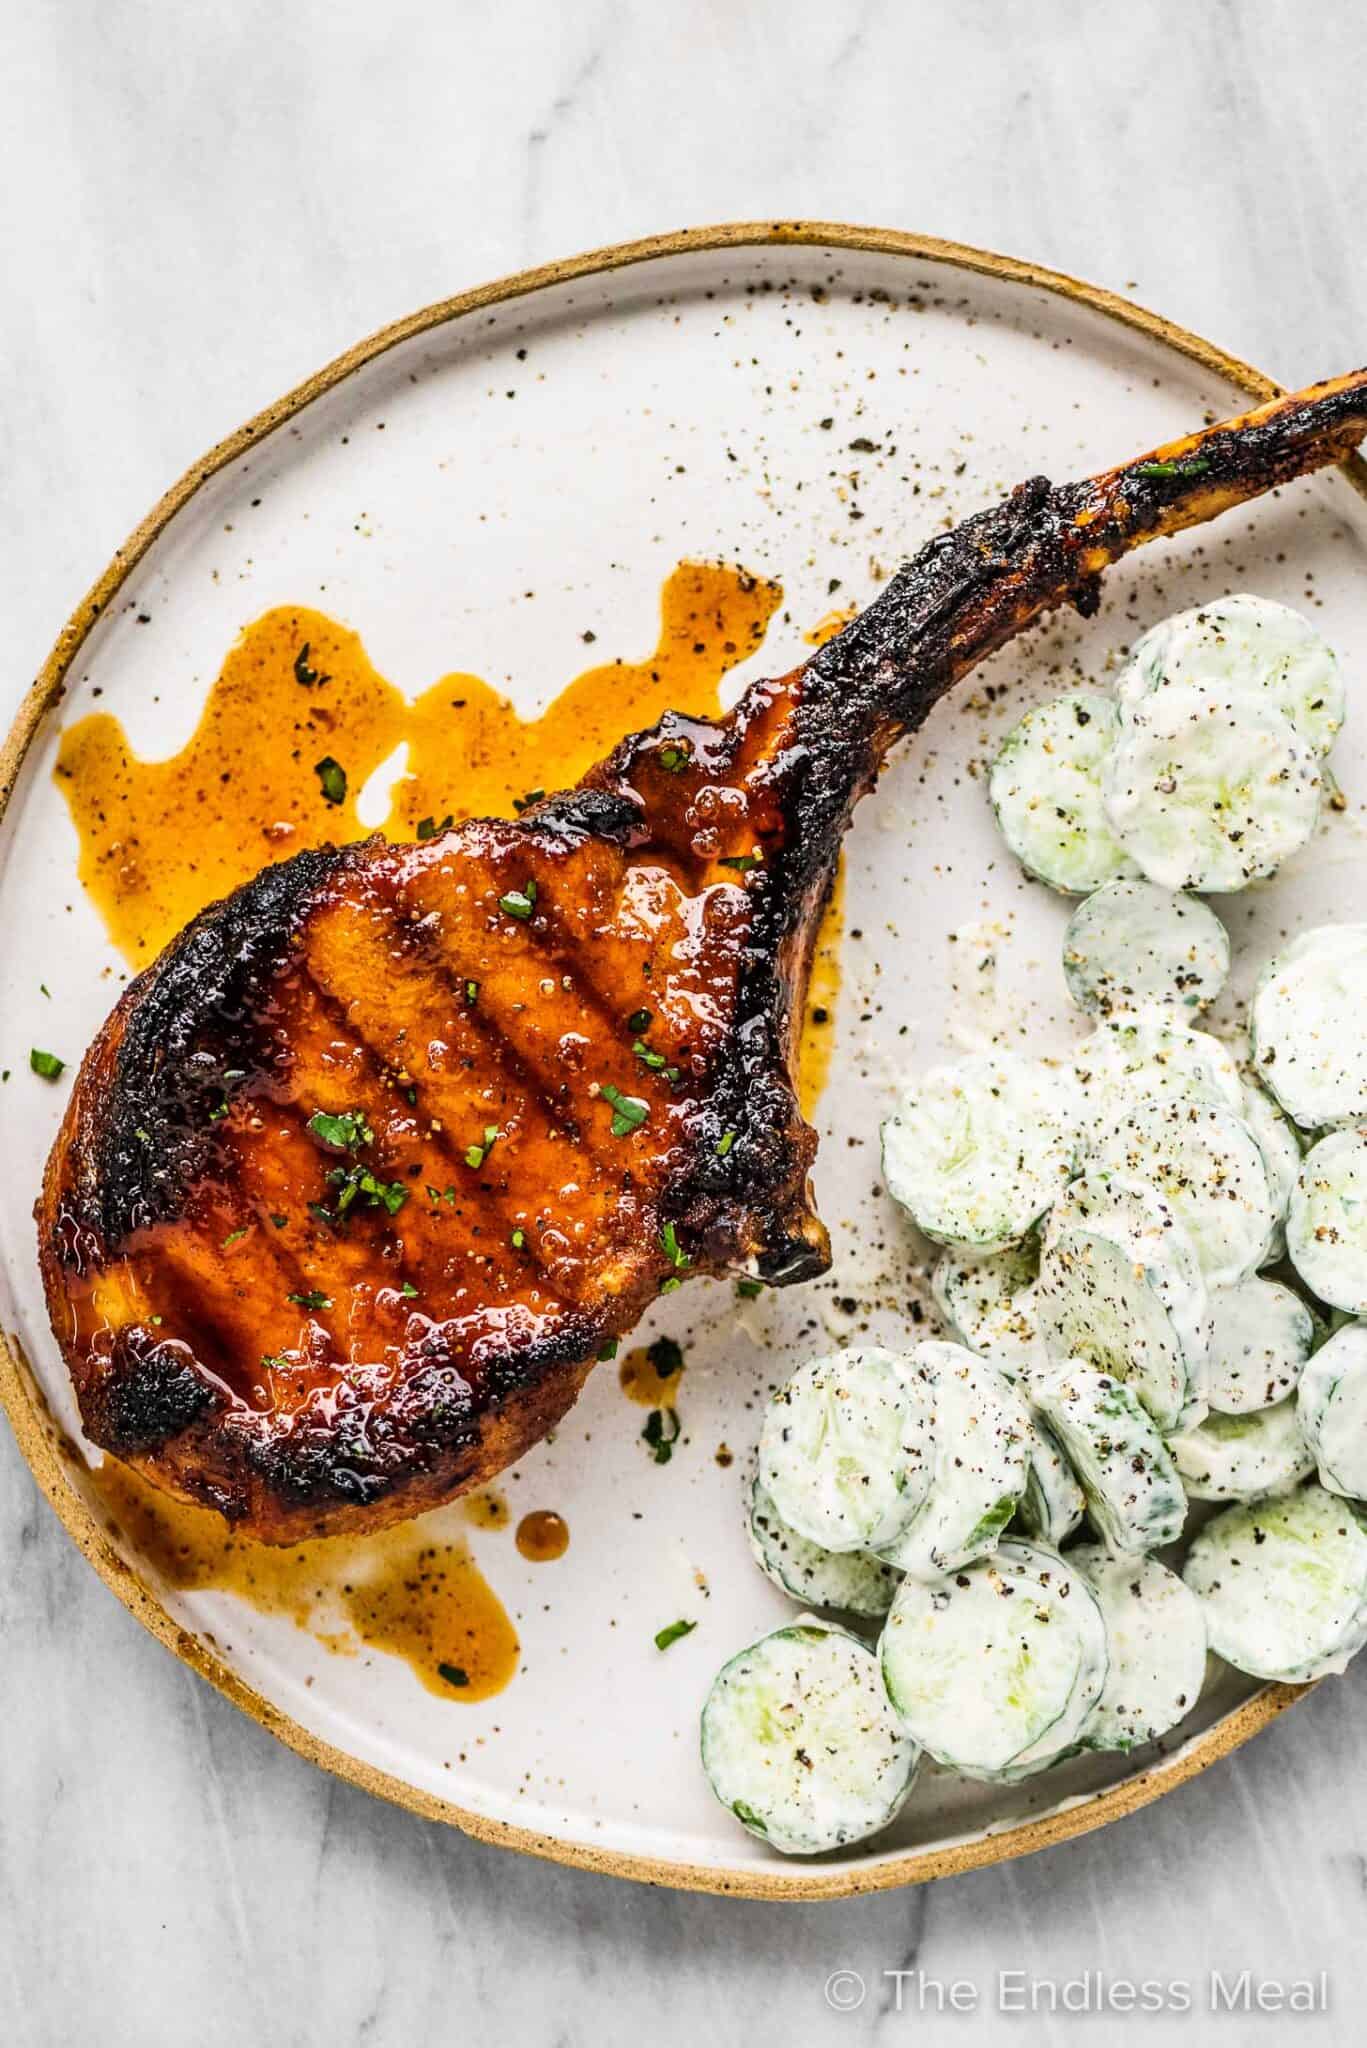 A tomahawk pork chop with honey garlic sauce on a plate with cucumber salad.